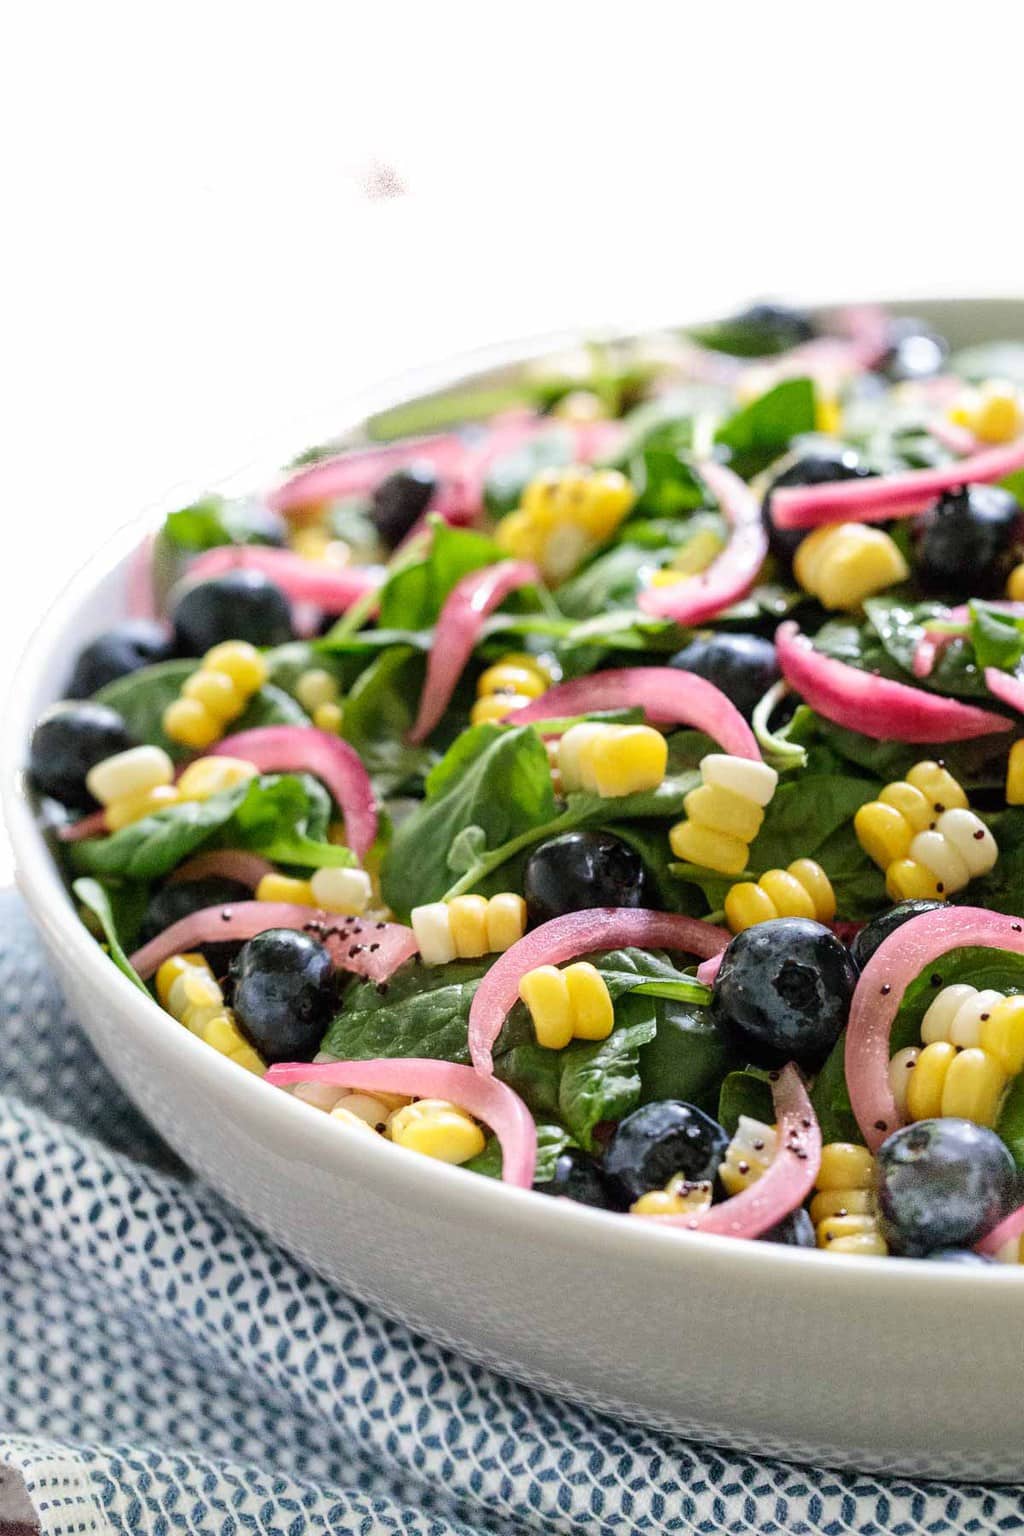 Vertical photo of Fresh Corn and Blueberry Spinach Salad in a white serving bowl on a blue and white patterned towel.